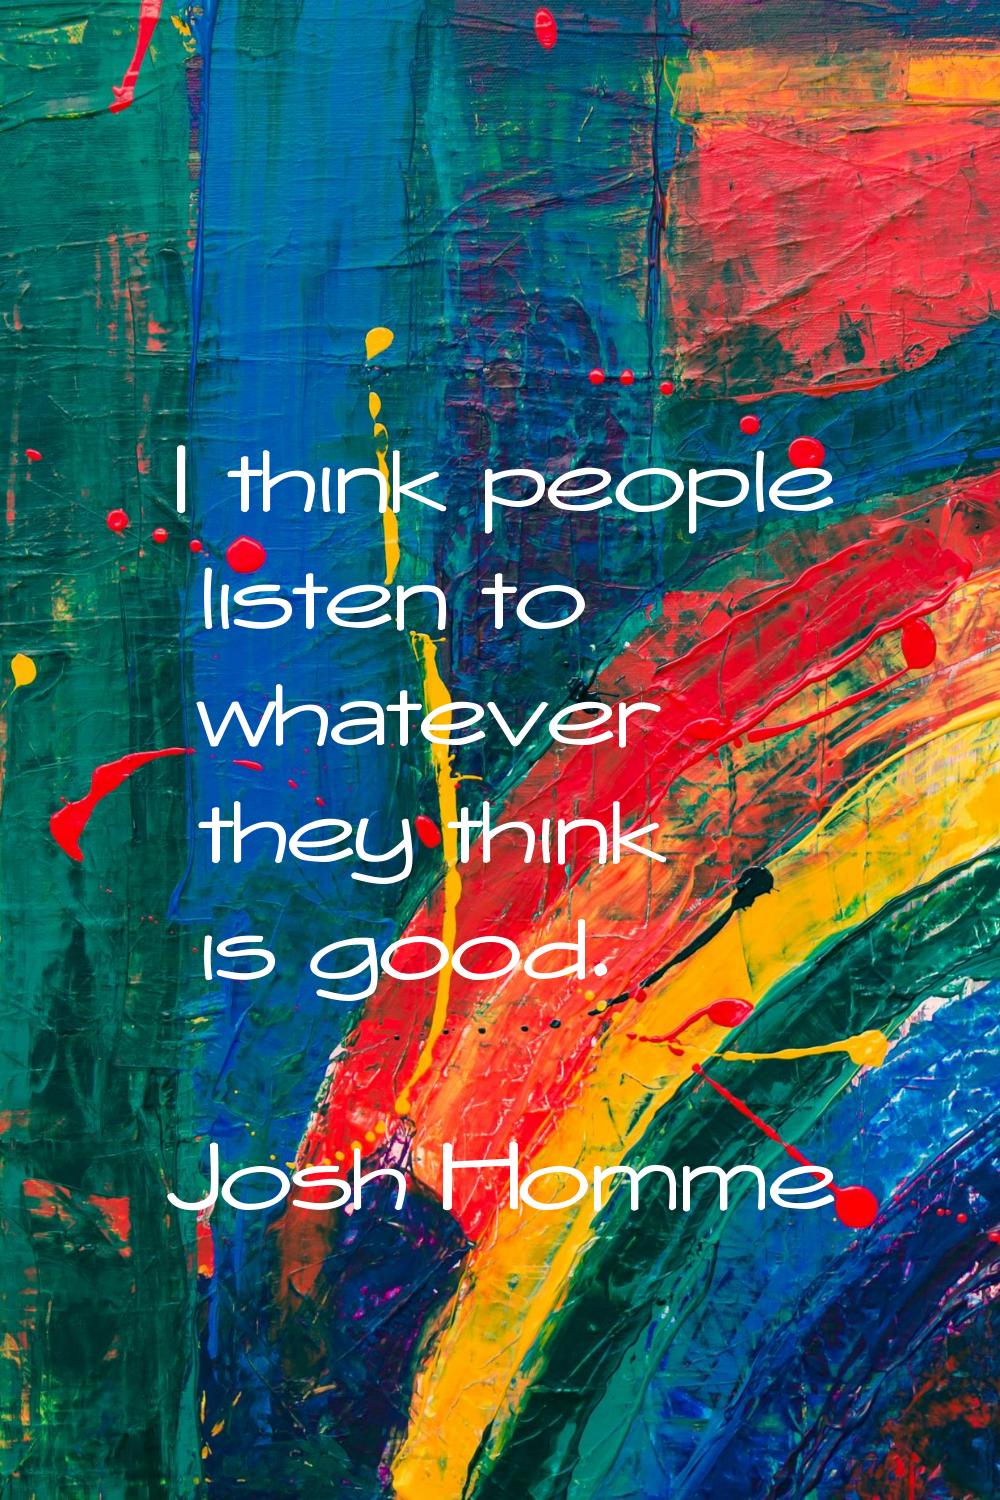 I think people listen to whatever they think is good.